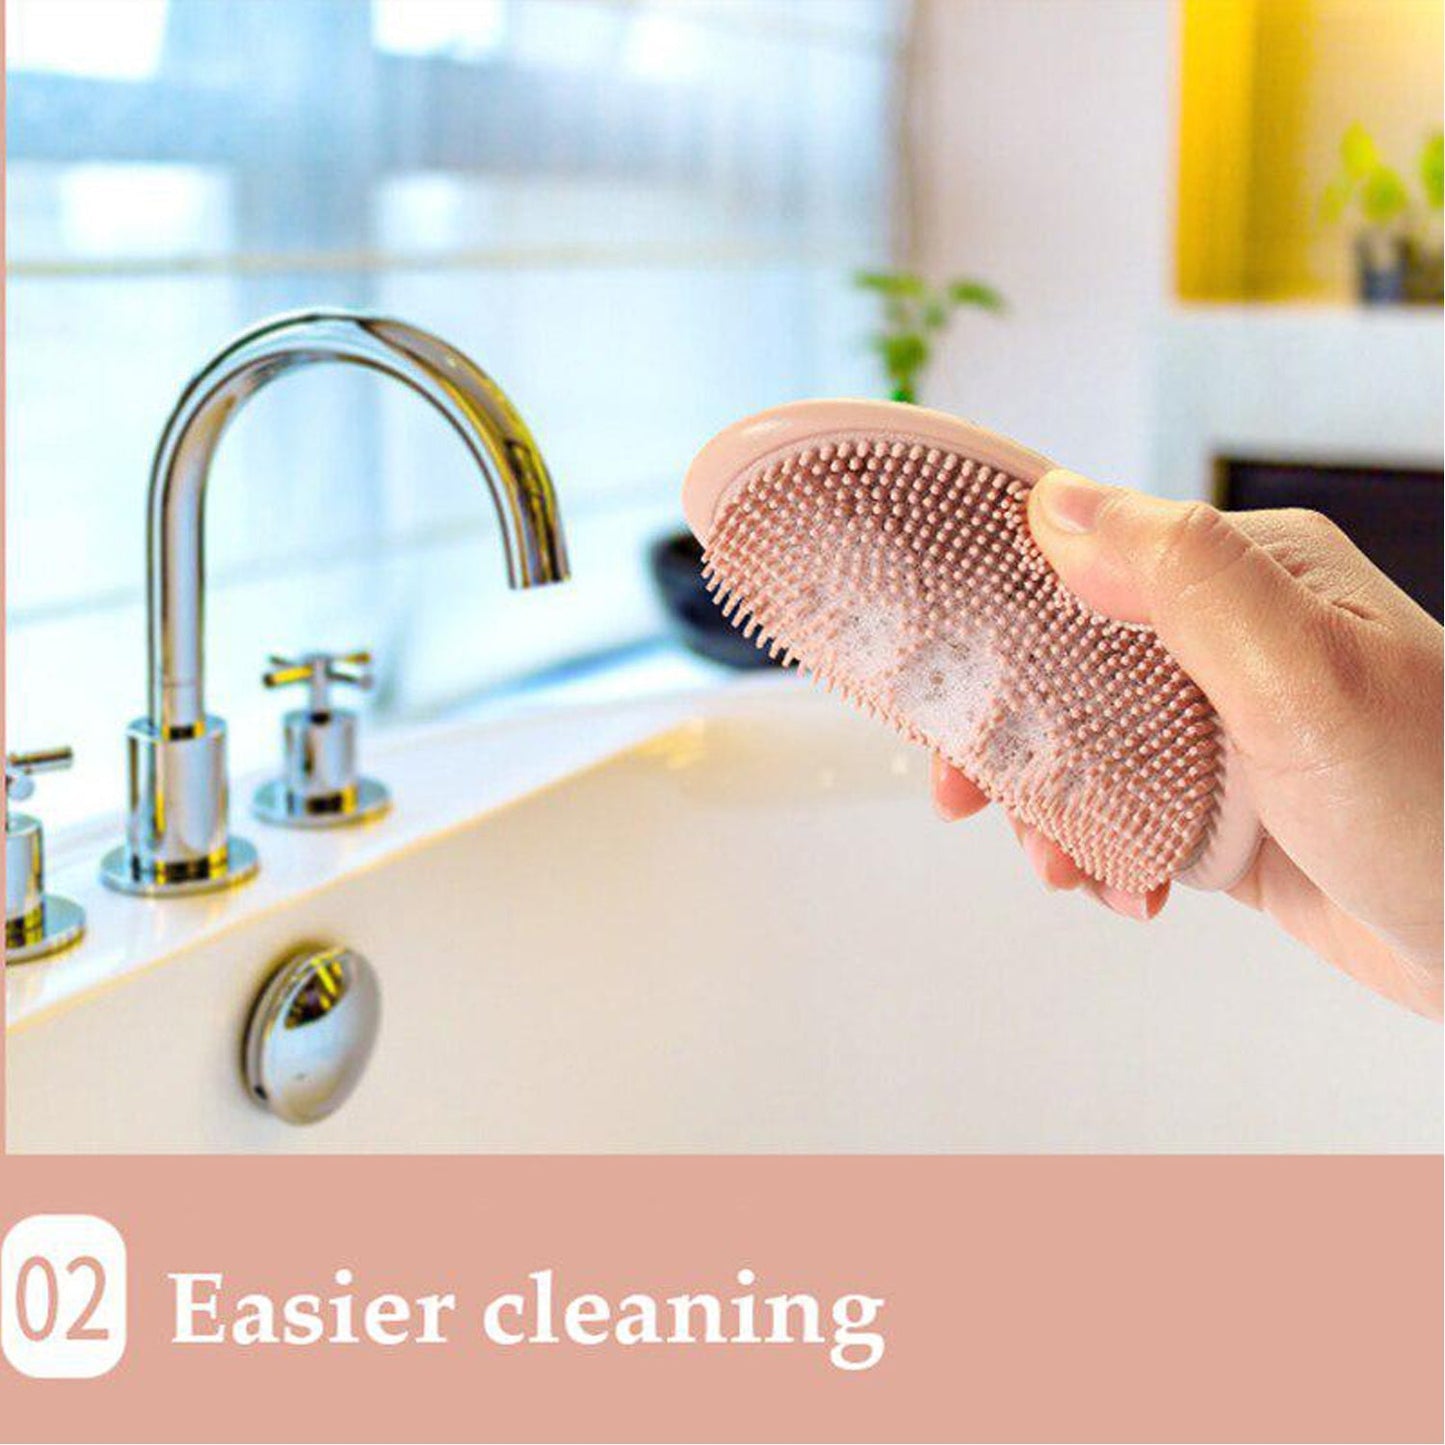 6137 2 in 1 Silicone Cleaning Brush used in all kinds of bathroom purposes for cleaning and washing floors, corners, surfaces and many more things. 